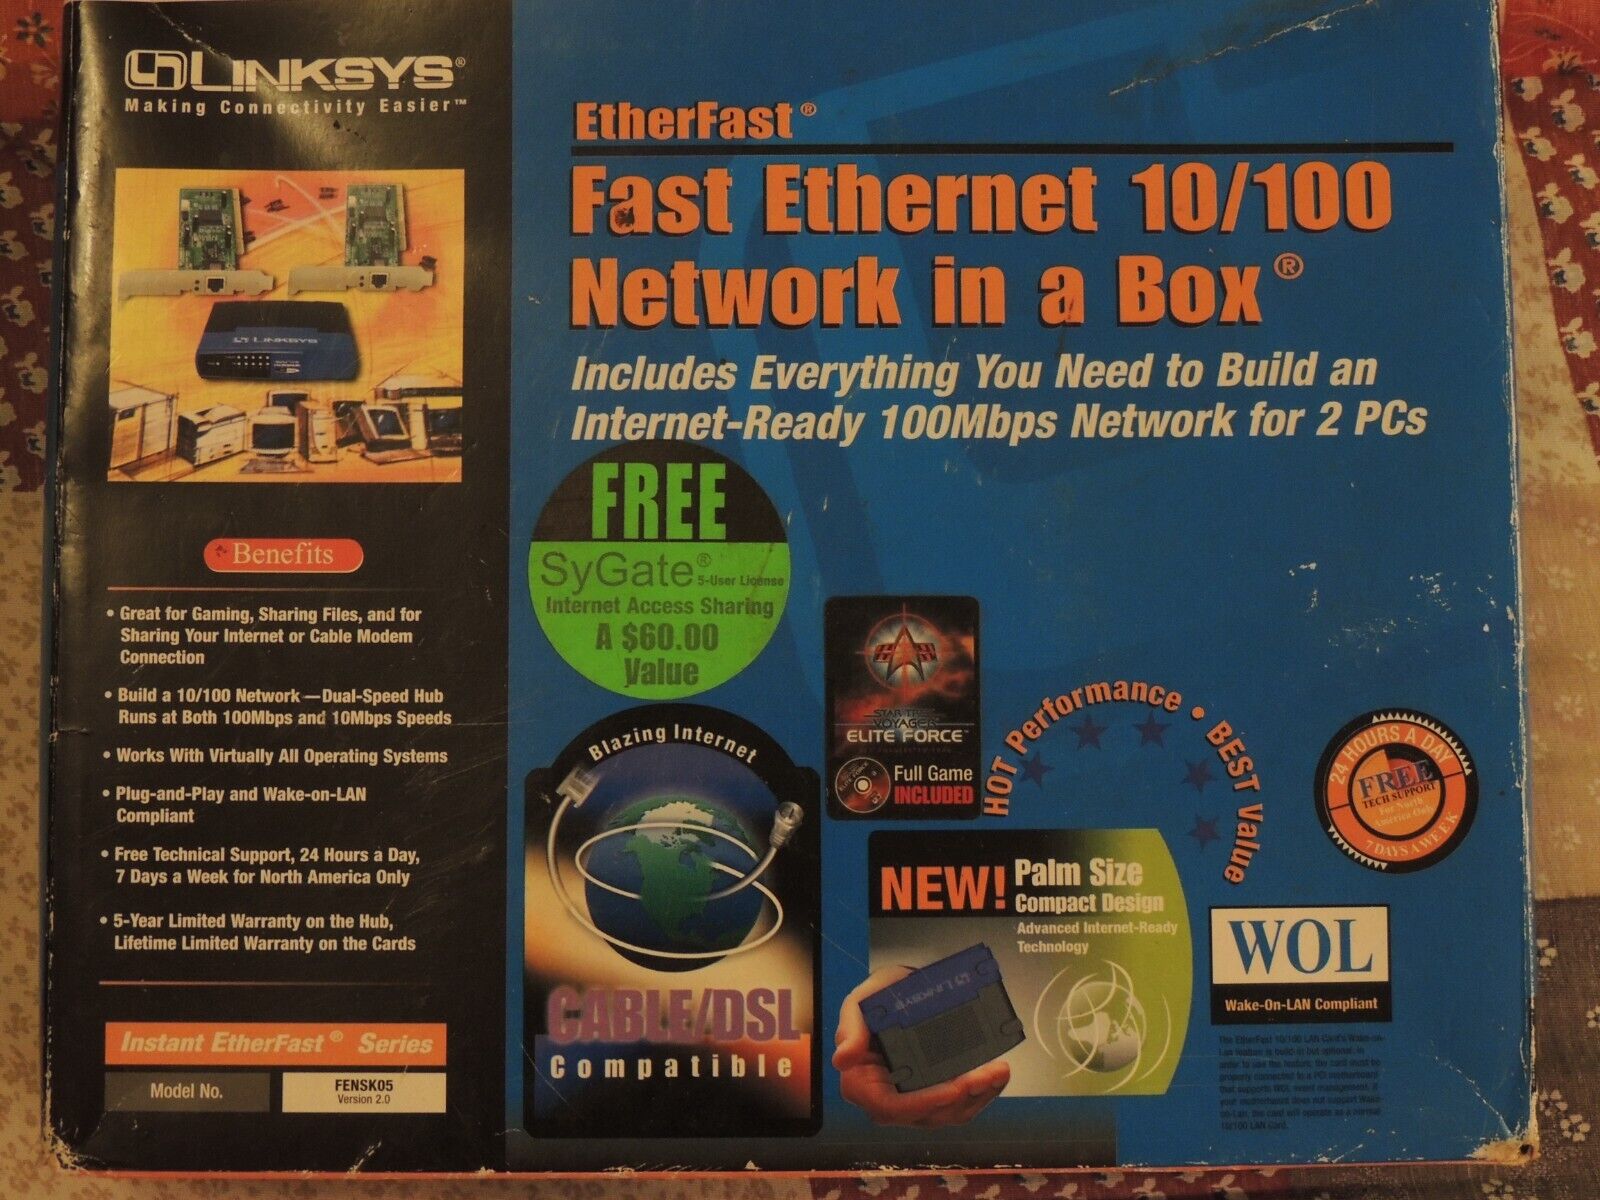 LINKSYS EatherFast Fast Ethernet 10/100 Network In A Box (FENSK05)